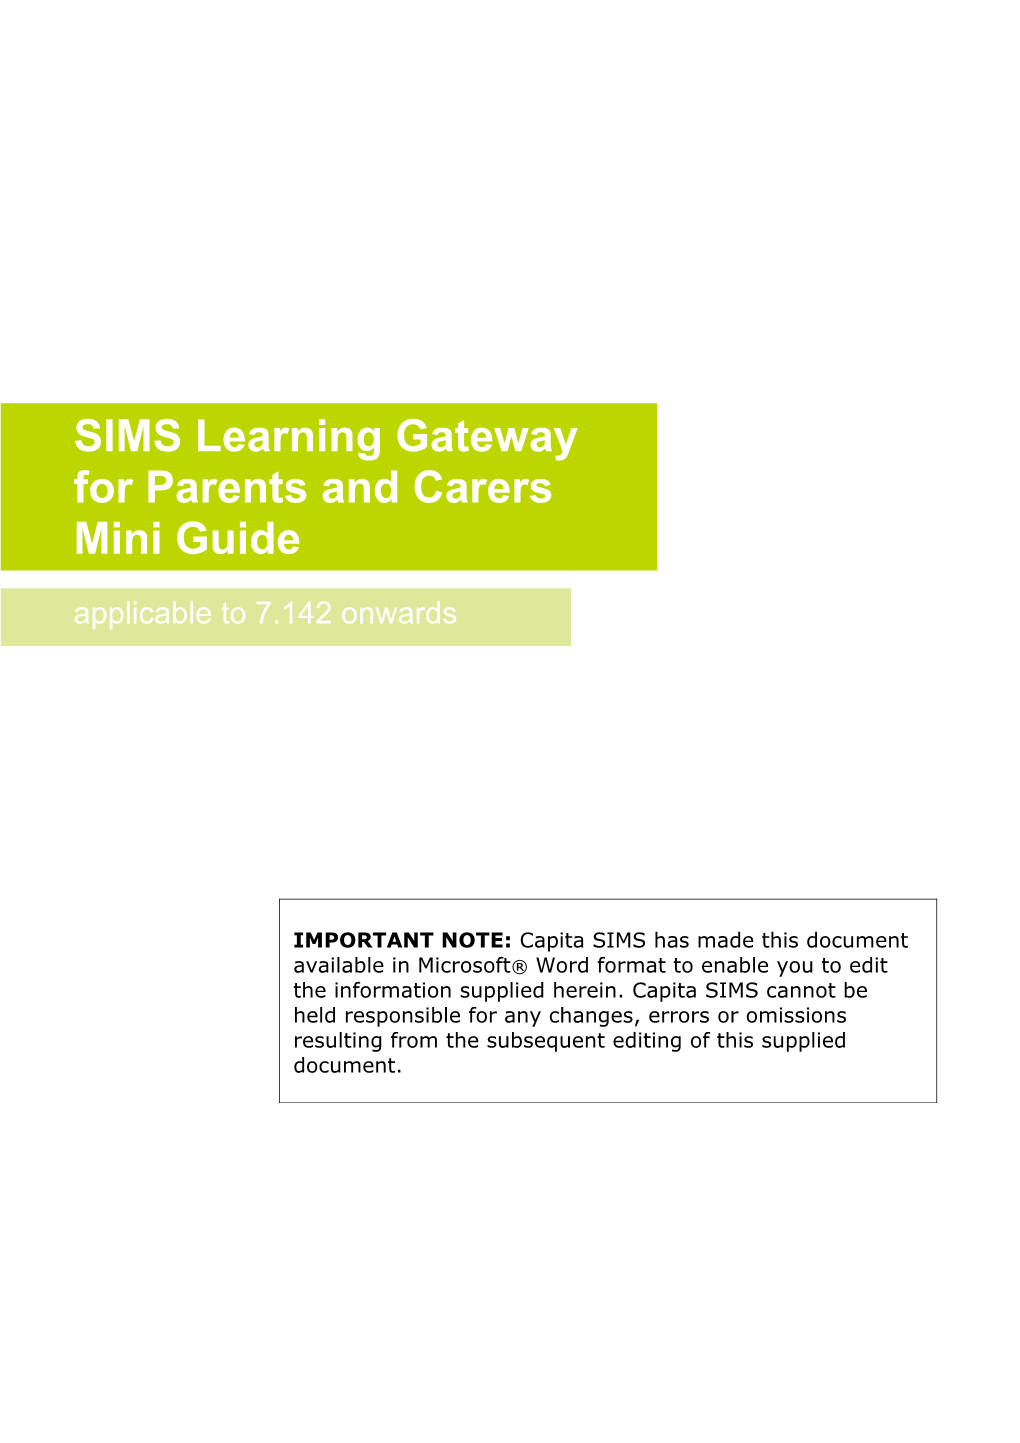 SIMS Learning Gateway for Parents and Carers Mini Guide